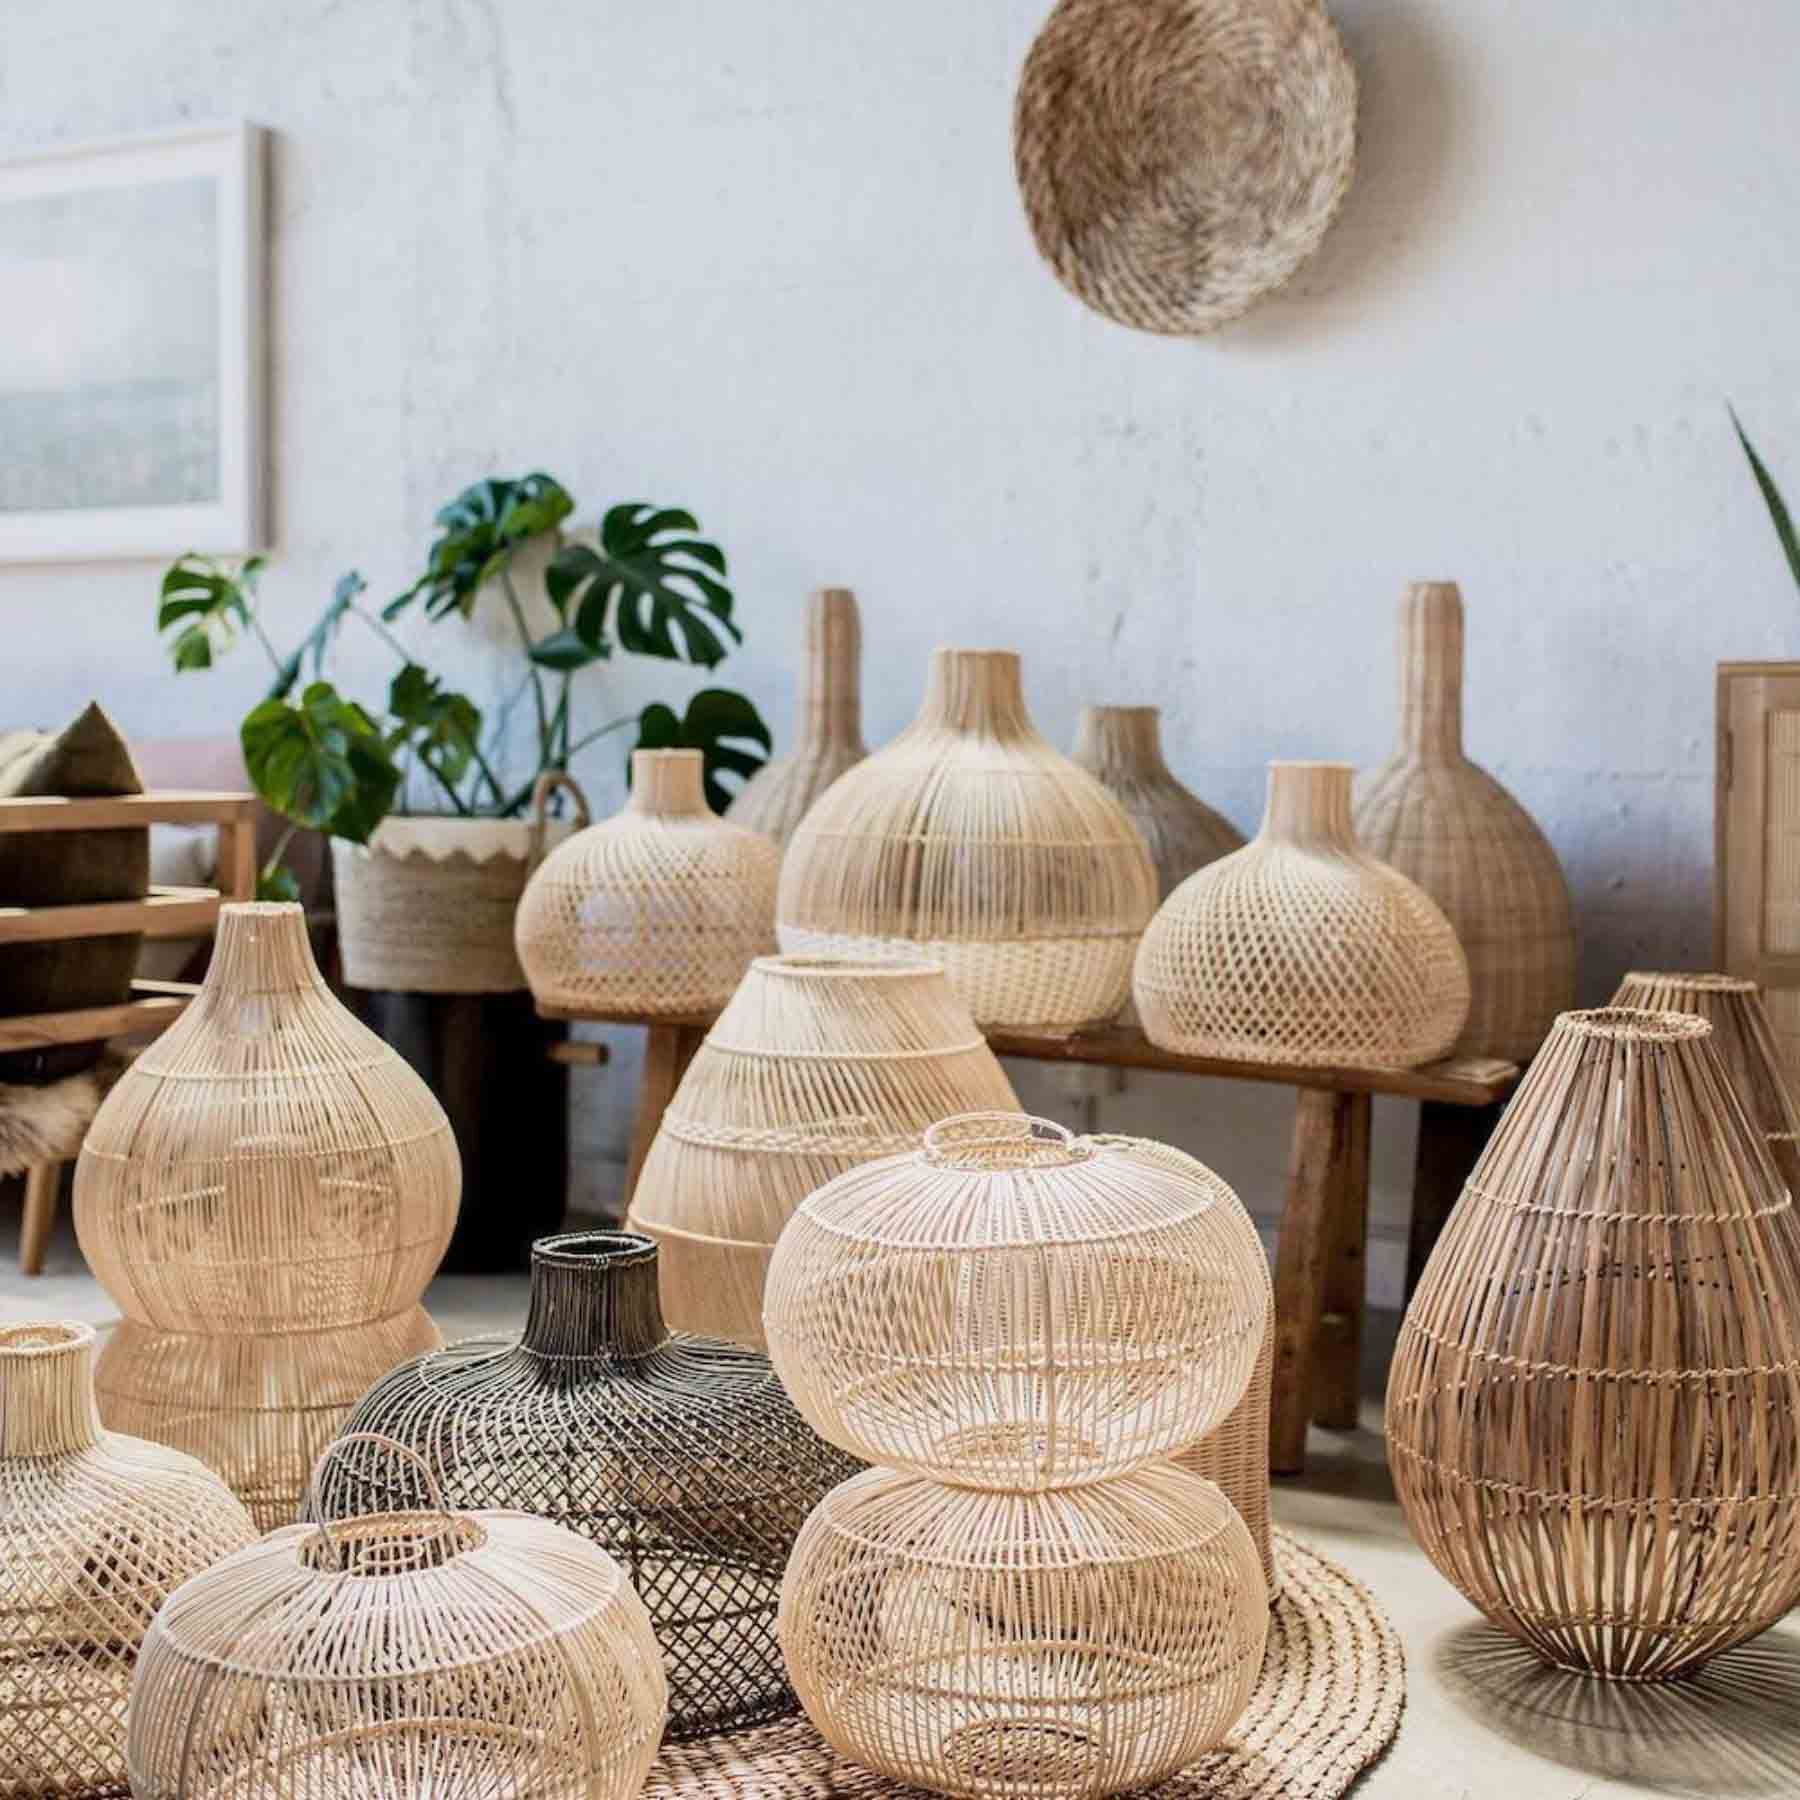 introducing biophilic elements like rattan pendants not only offers aesthetic appeal but also promotes healthy living spaces